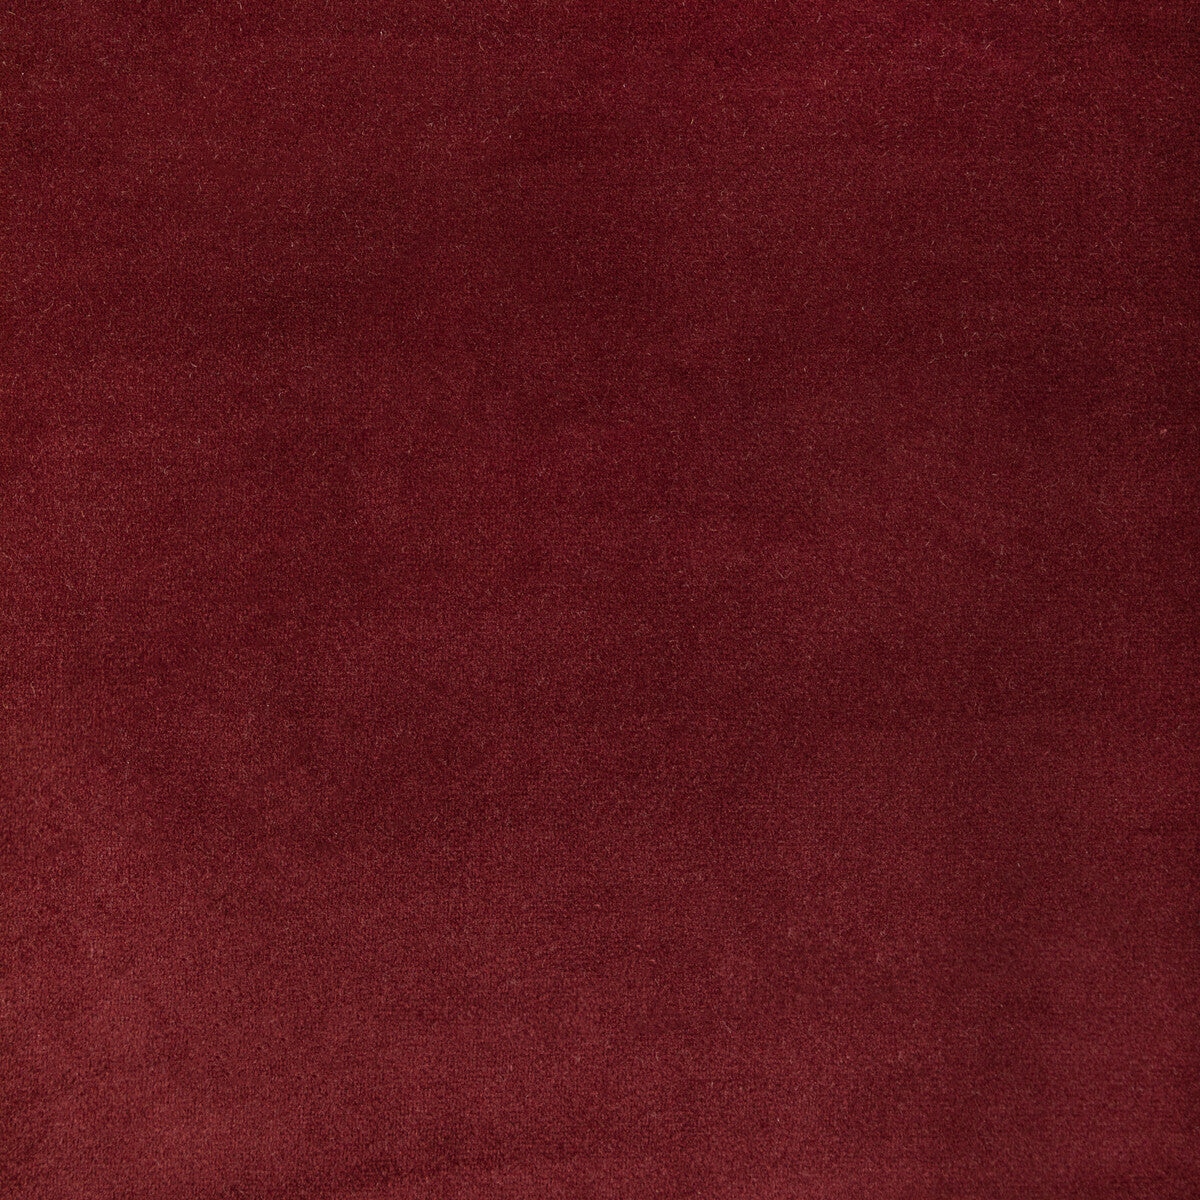 Rocco Velvet fabric in currant color - pattern 36652.912.0 - by Kravet Contract